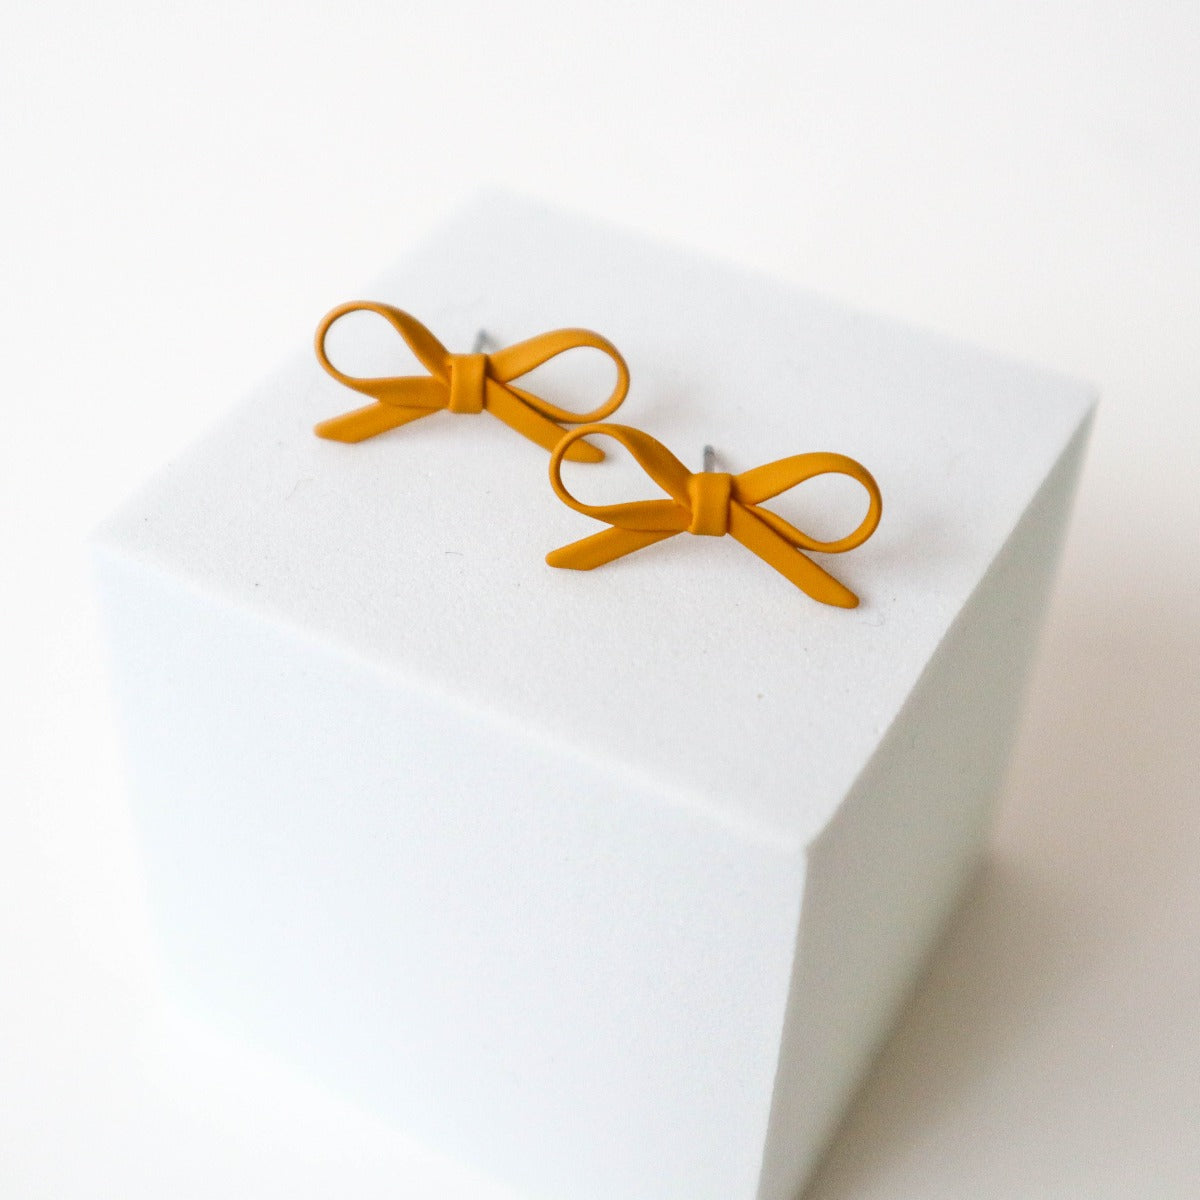 Mustard yellow bow shaped stud earrings on a white background.